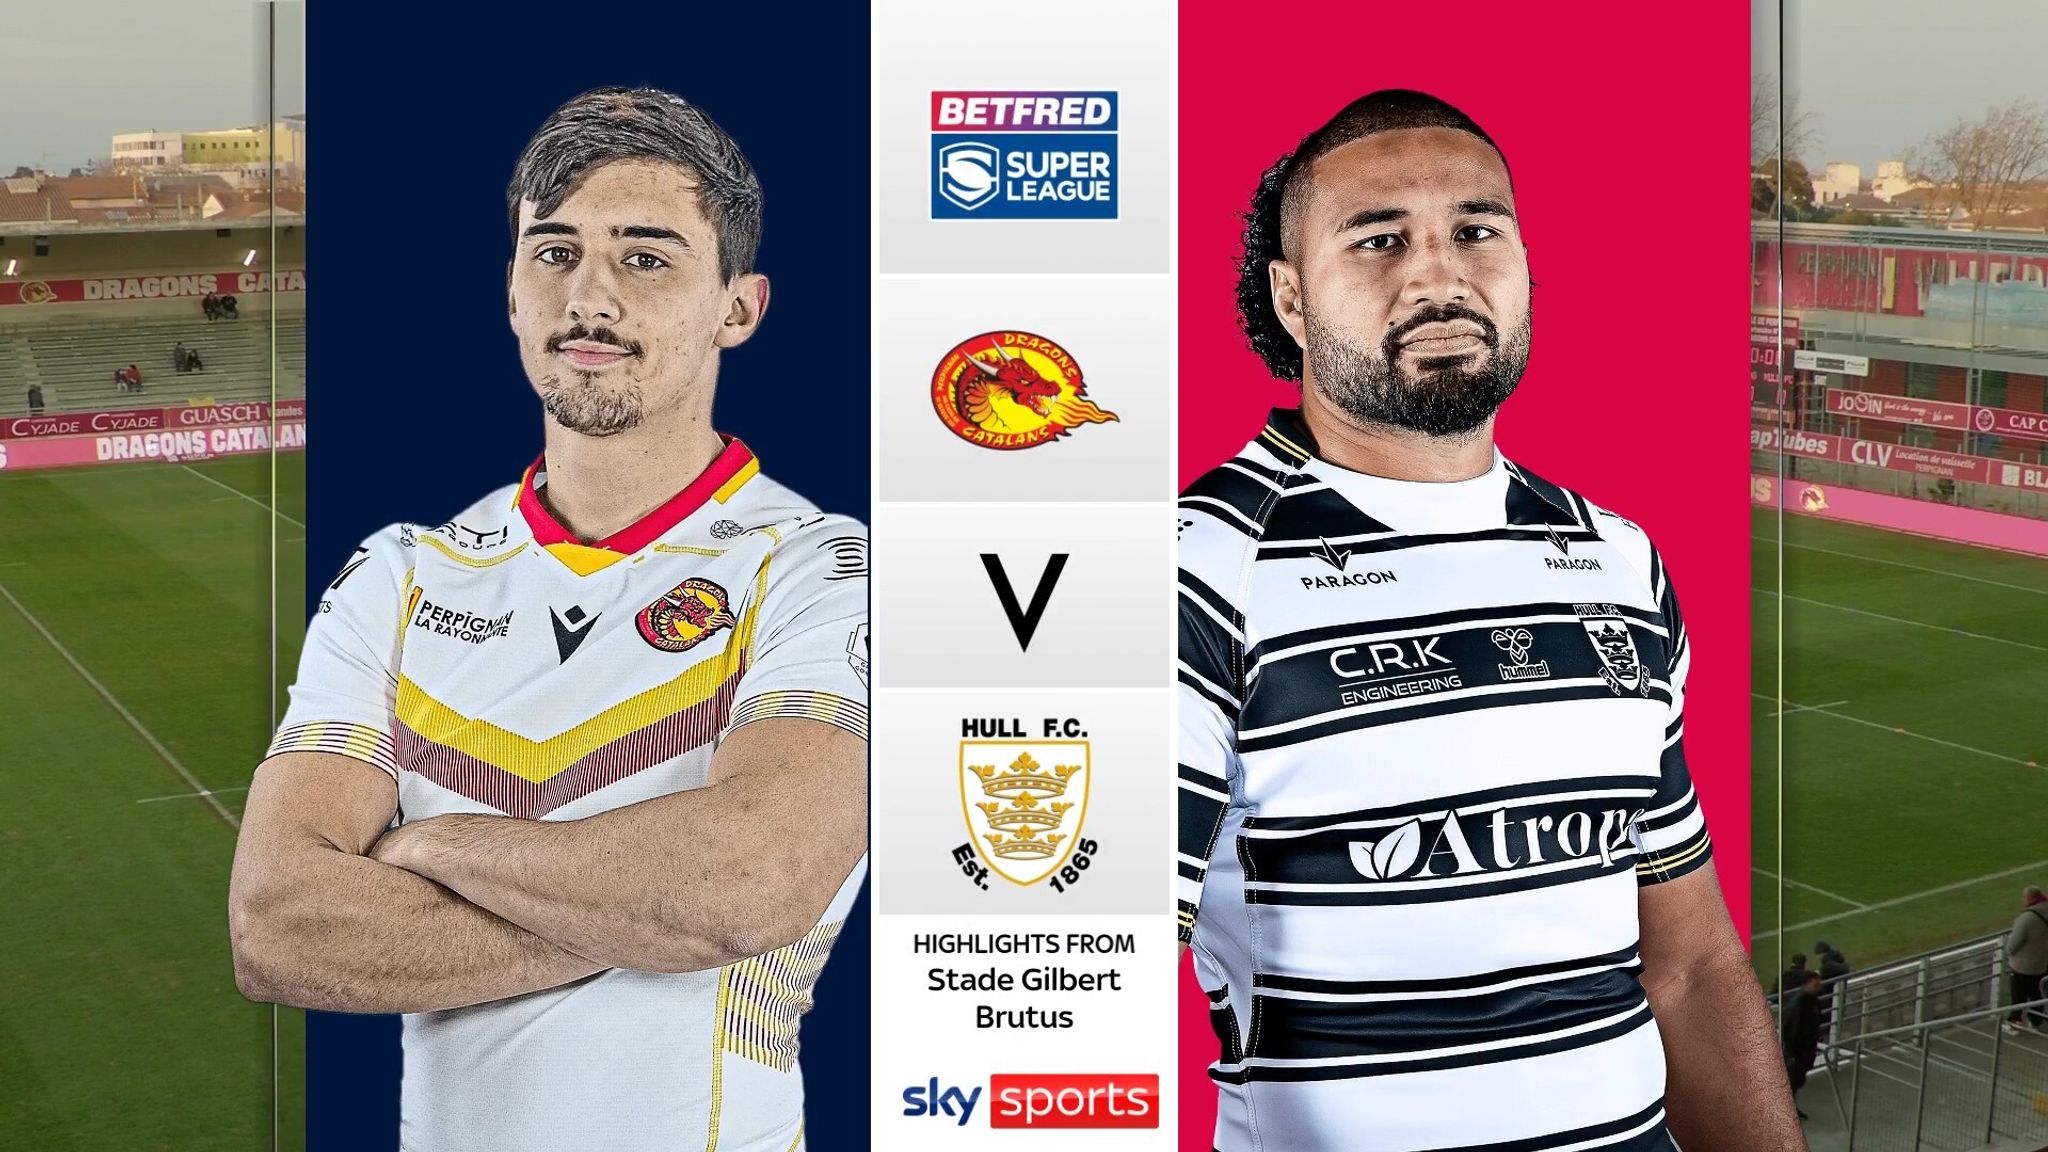 Catalans Dragons 38-6 Hull FC Super League highlights Video Watch TV Show Sky Sports